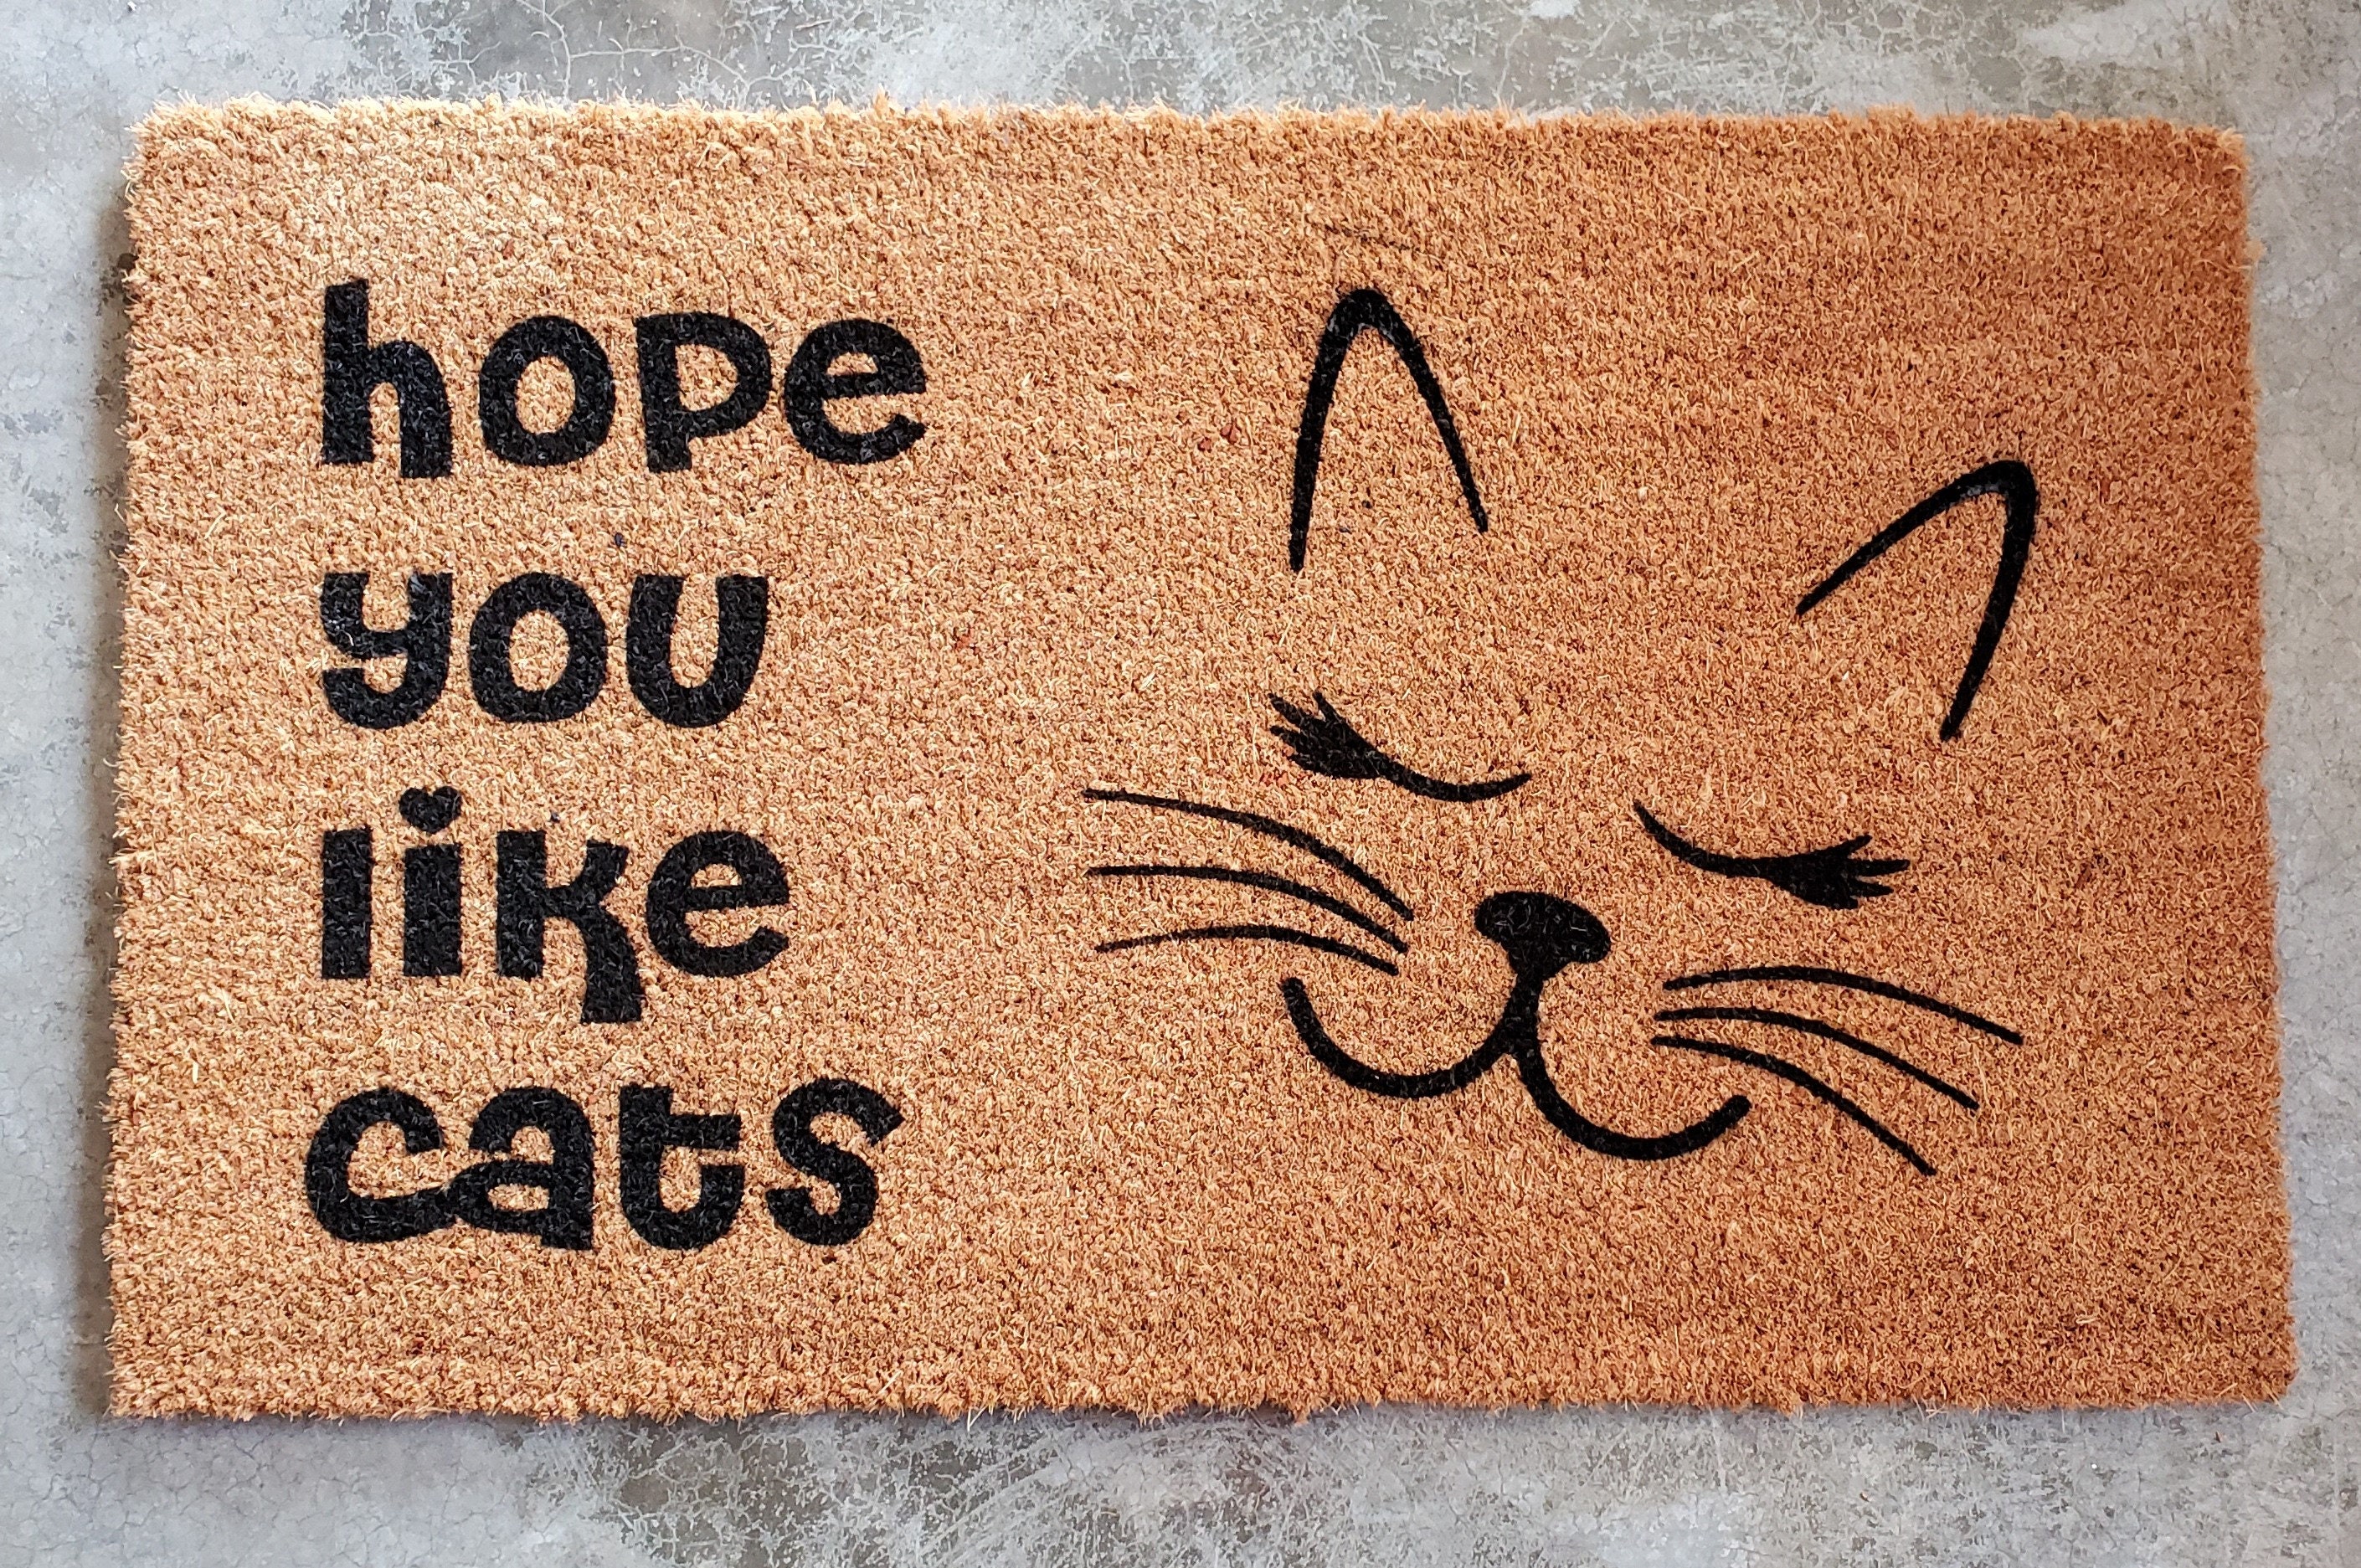 Hope You Like Dogs & Cats - Personalized Doormat